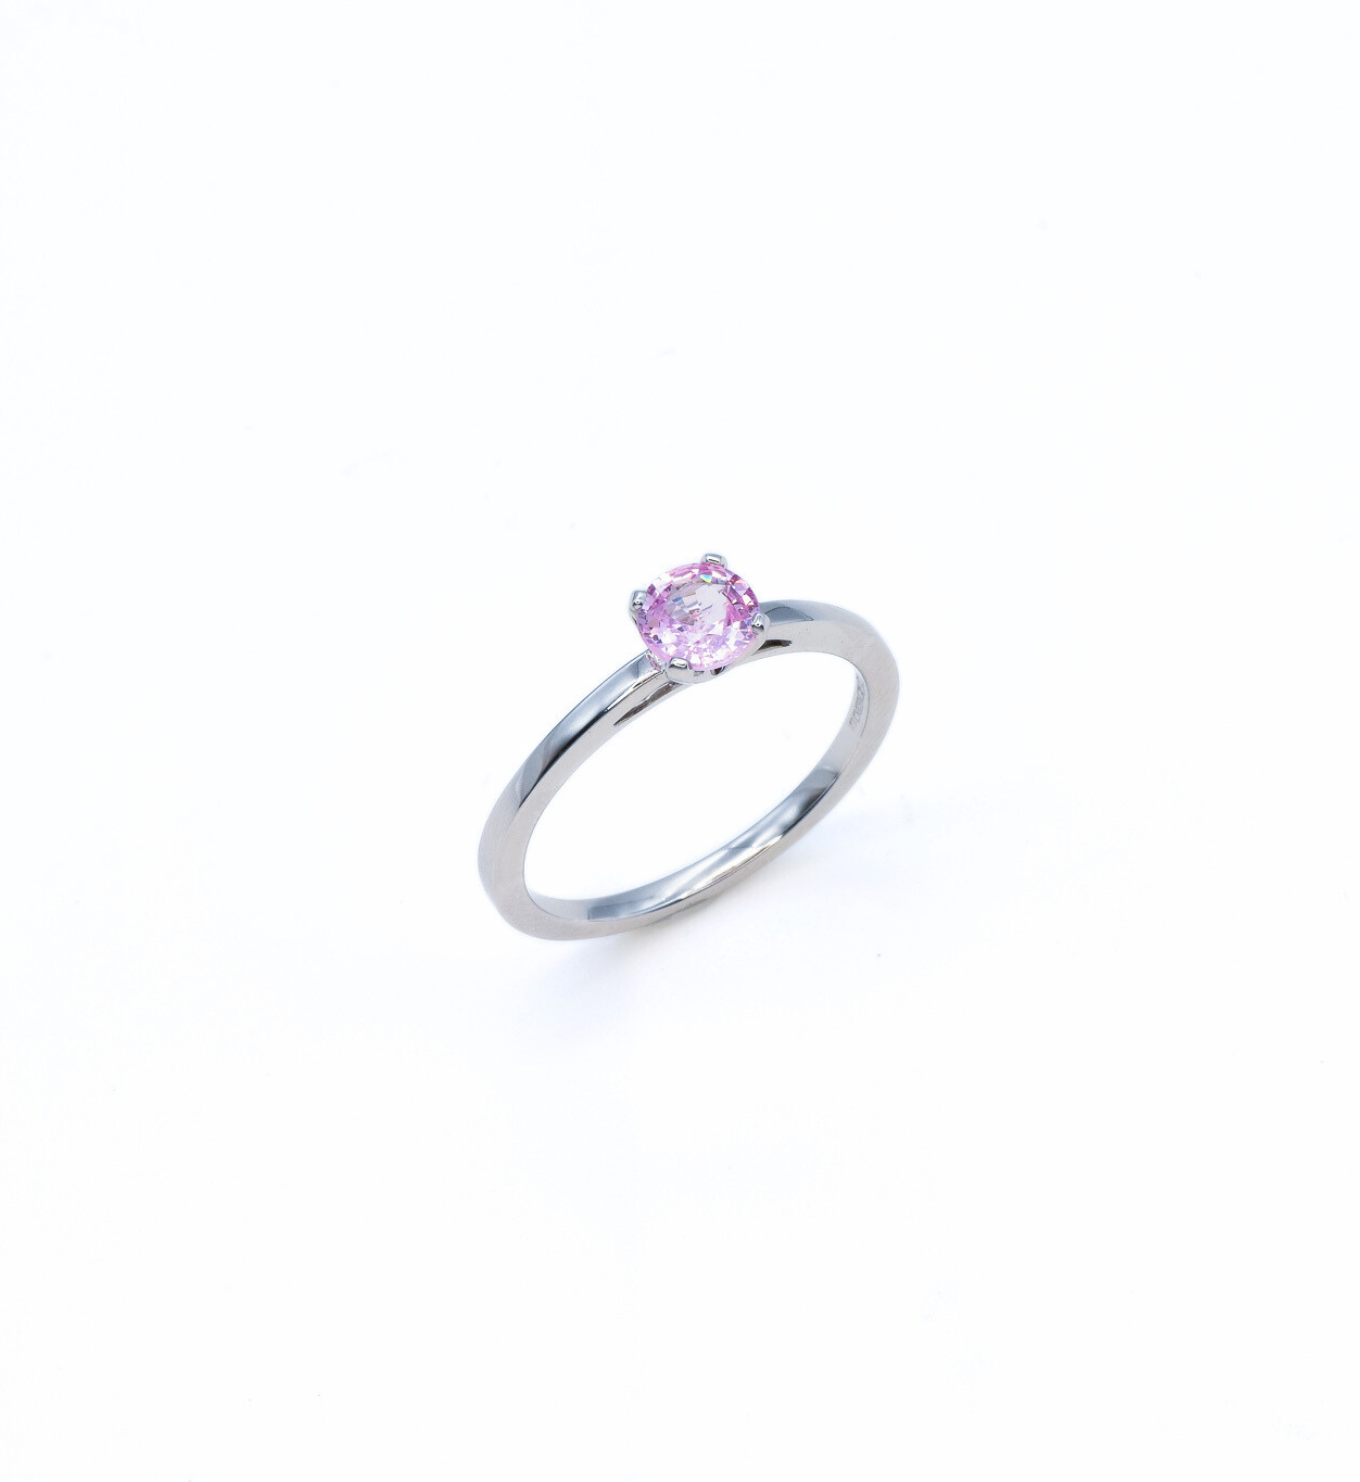 Certified Pink Sapphire Ring, Pink Sapphire Ring, Round Engagement Ring, Special Engagement Ring, 18k White Gold Ring